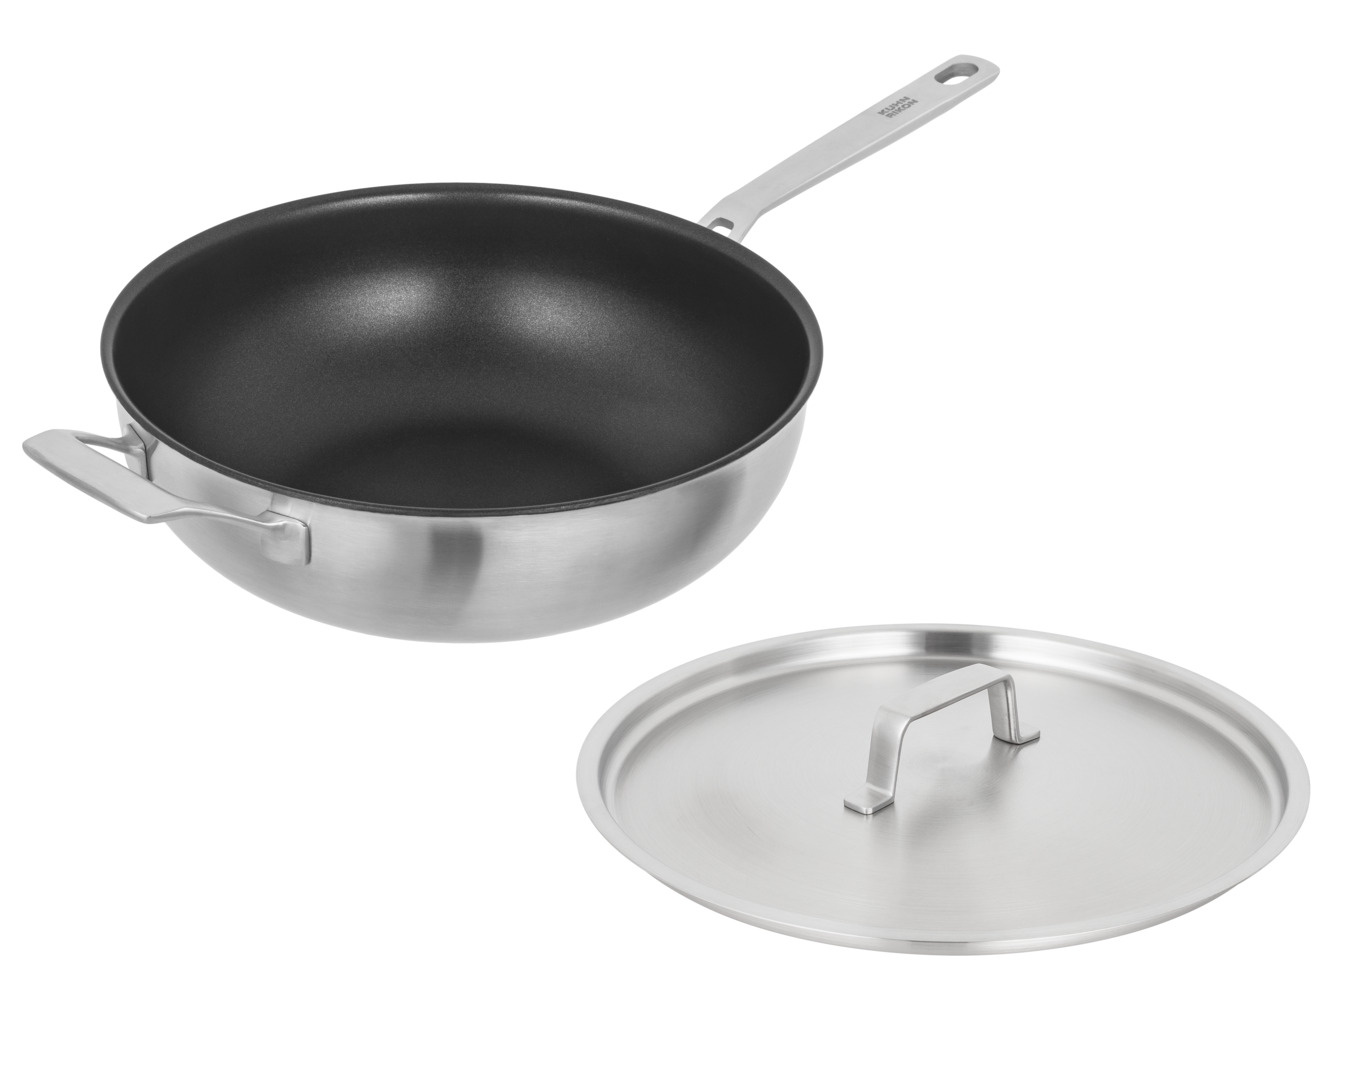 Kuhn Rikon - CULINARY FIVEPLY Wok / Chef's pan with lid and helper handle non-stick 28cm